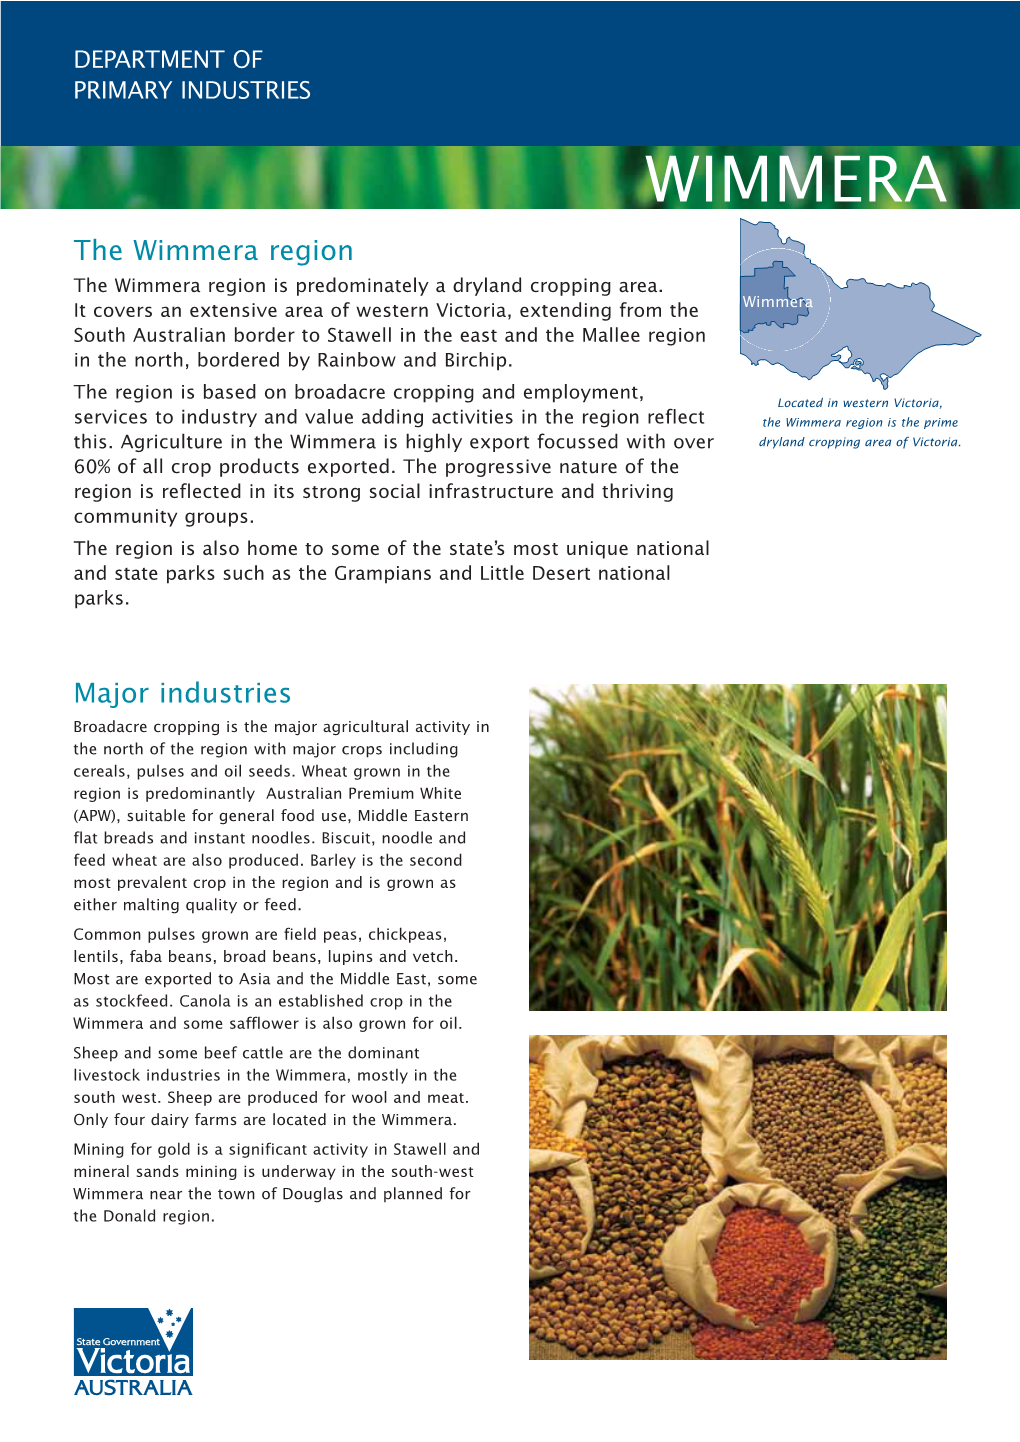 WIMMERA the Wimmera Region the Wimmera Region Is Predominately a Dryland Cropping Area